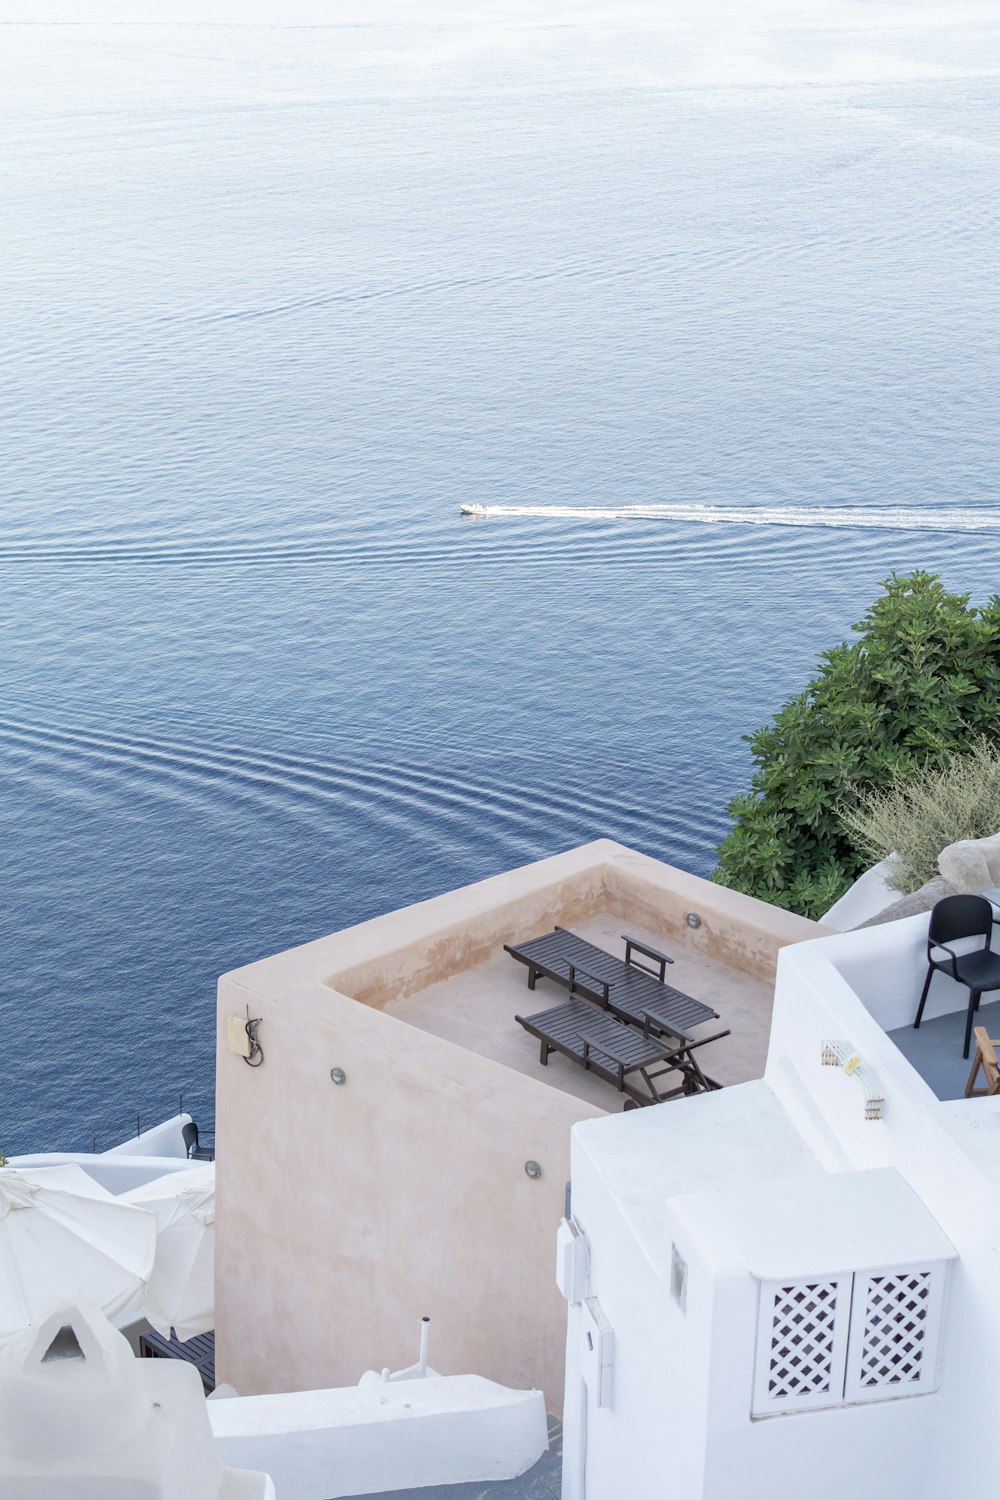 2 black outdoor lounges on building terrace across body of water